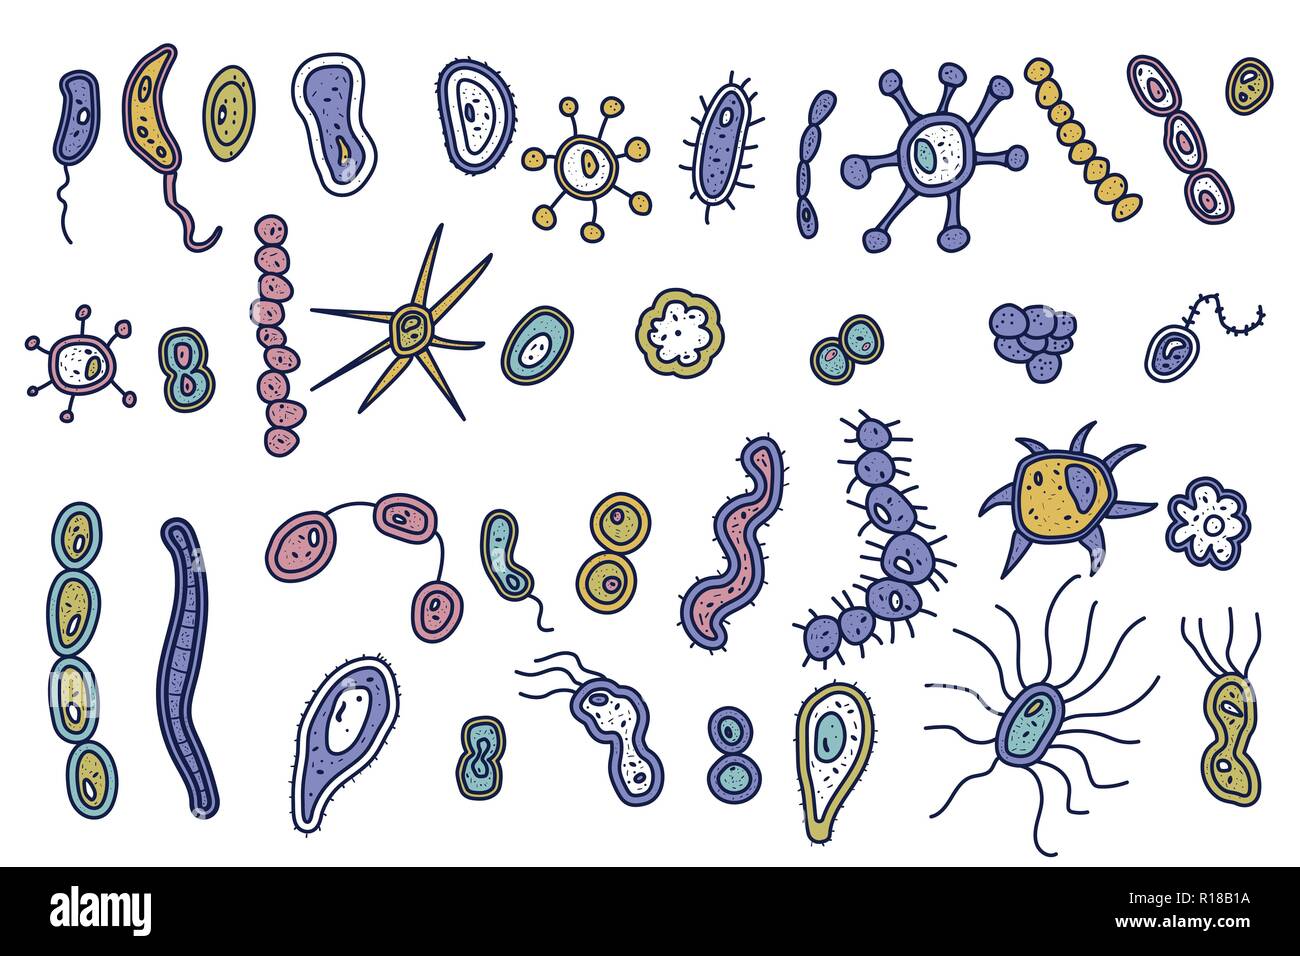 Set of bacteria cell. Microorganism collection. Vector colorful doodle style objects isolated on white background. Stock Vector